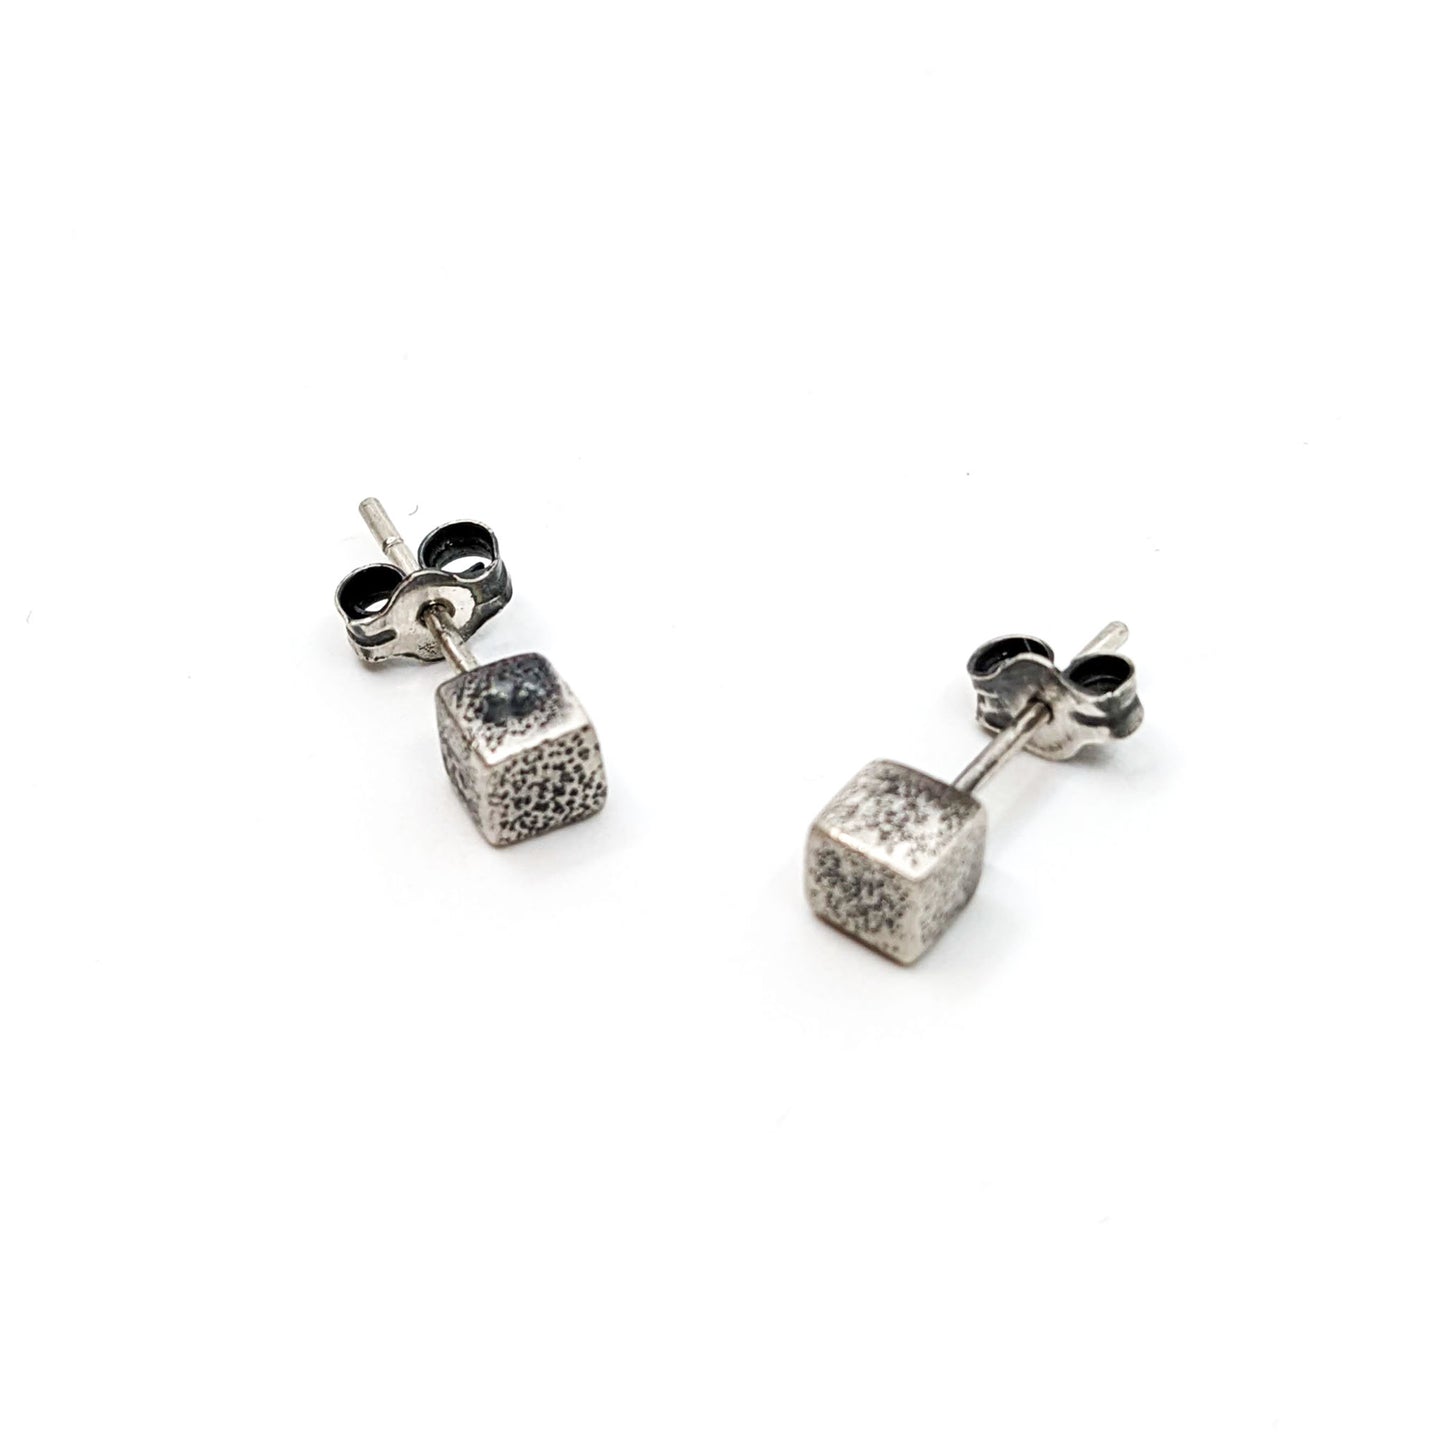 TN- Square Post Textured Earrings